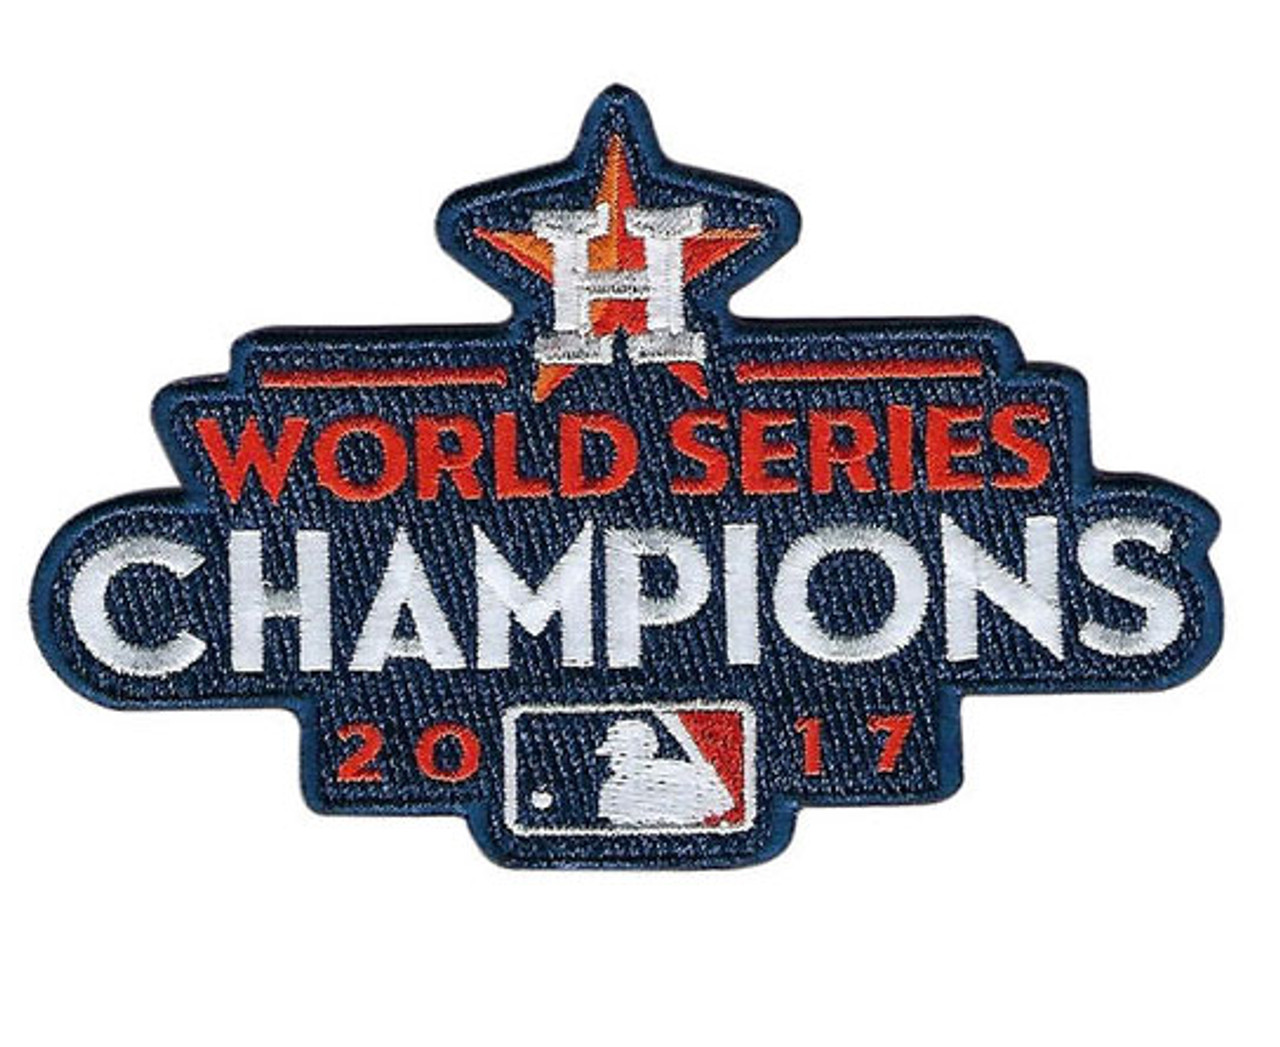 Houston Astros 2017 World Series Champs Patch